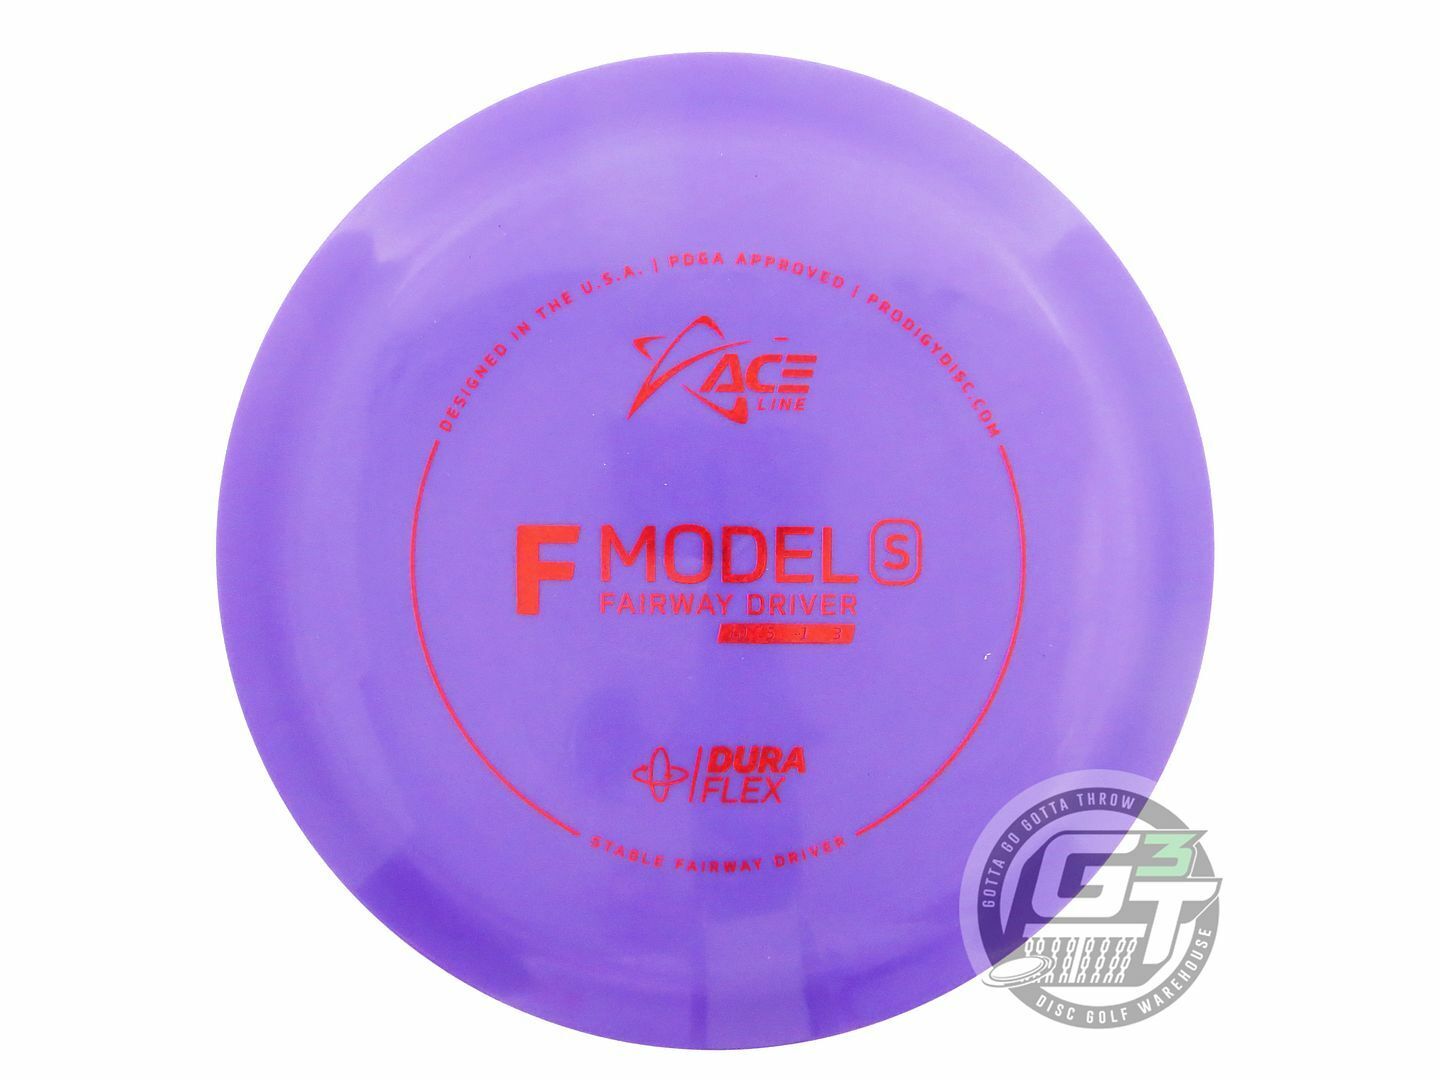 Prodigy Ace Line DuraFlex F Model S Fairway Driver Golf Disc (Individually Listed)